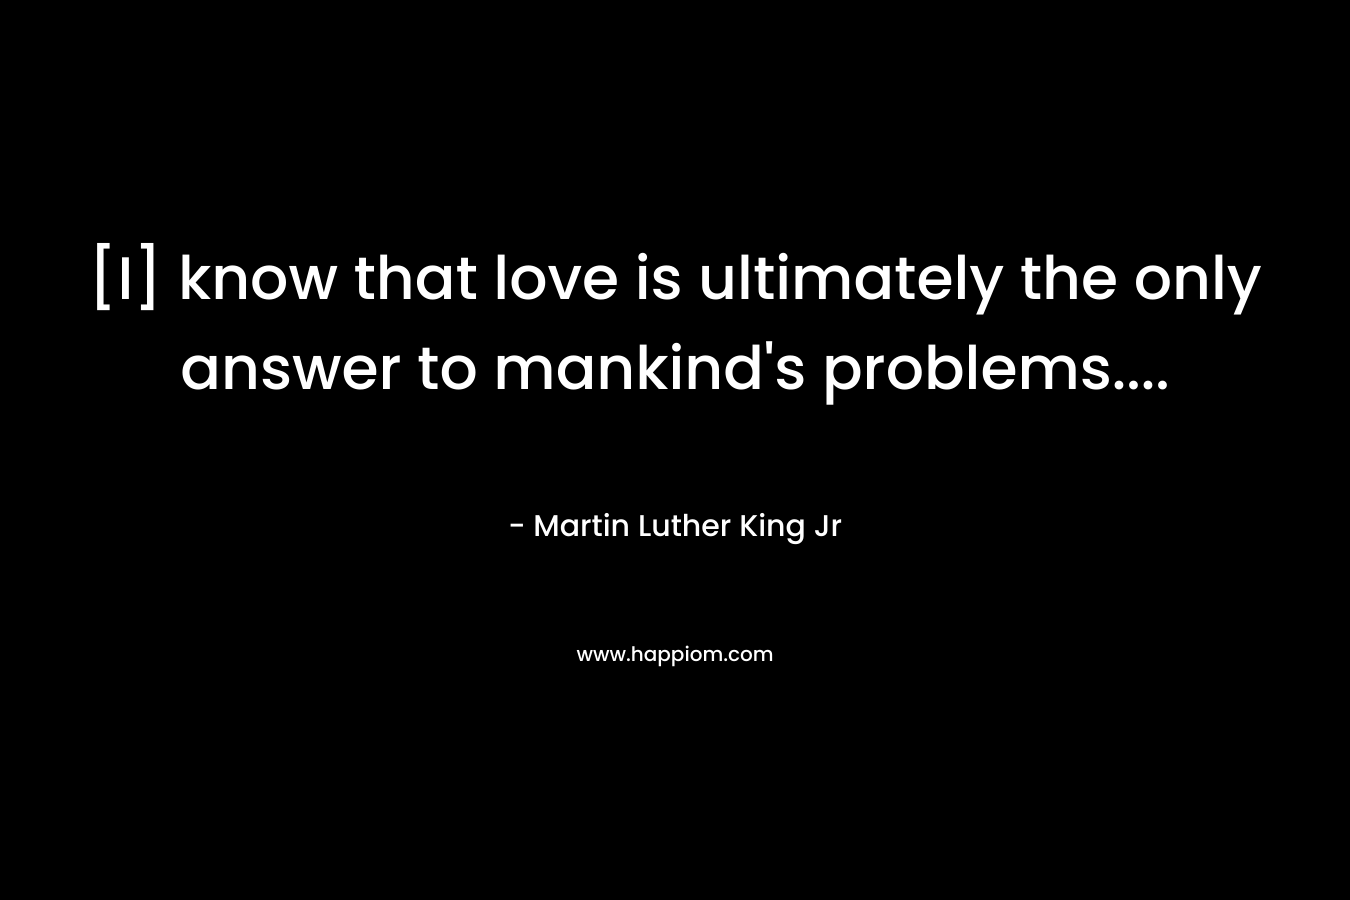 [I] know that love is ultimately the only answer to mankind’s problems…. – Martin Luther King Jr